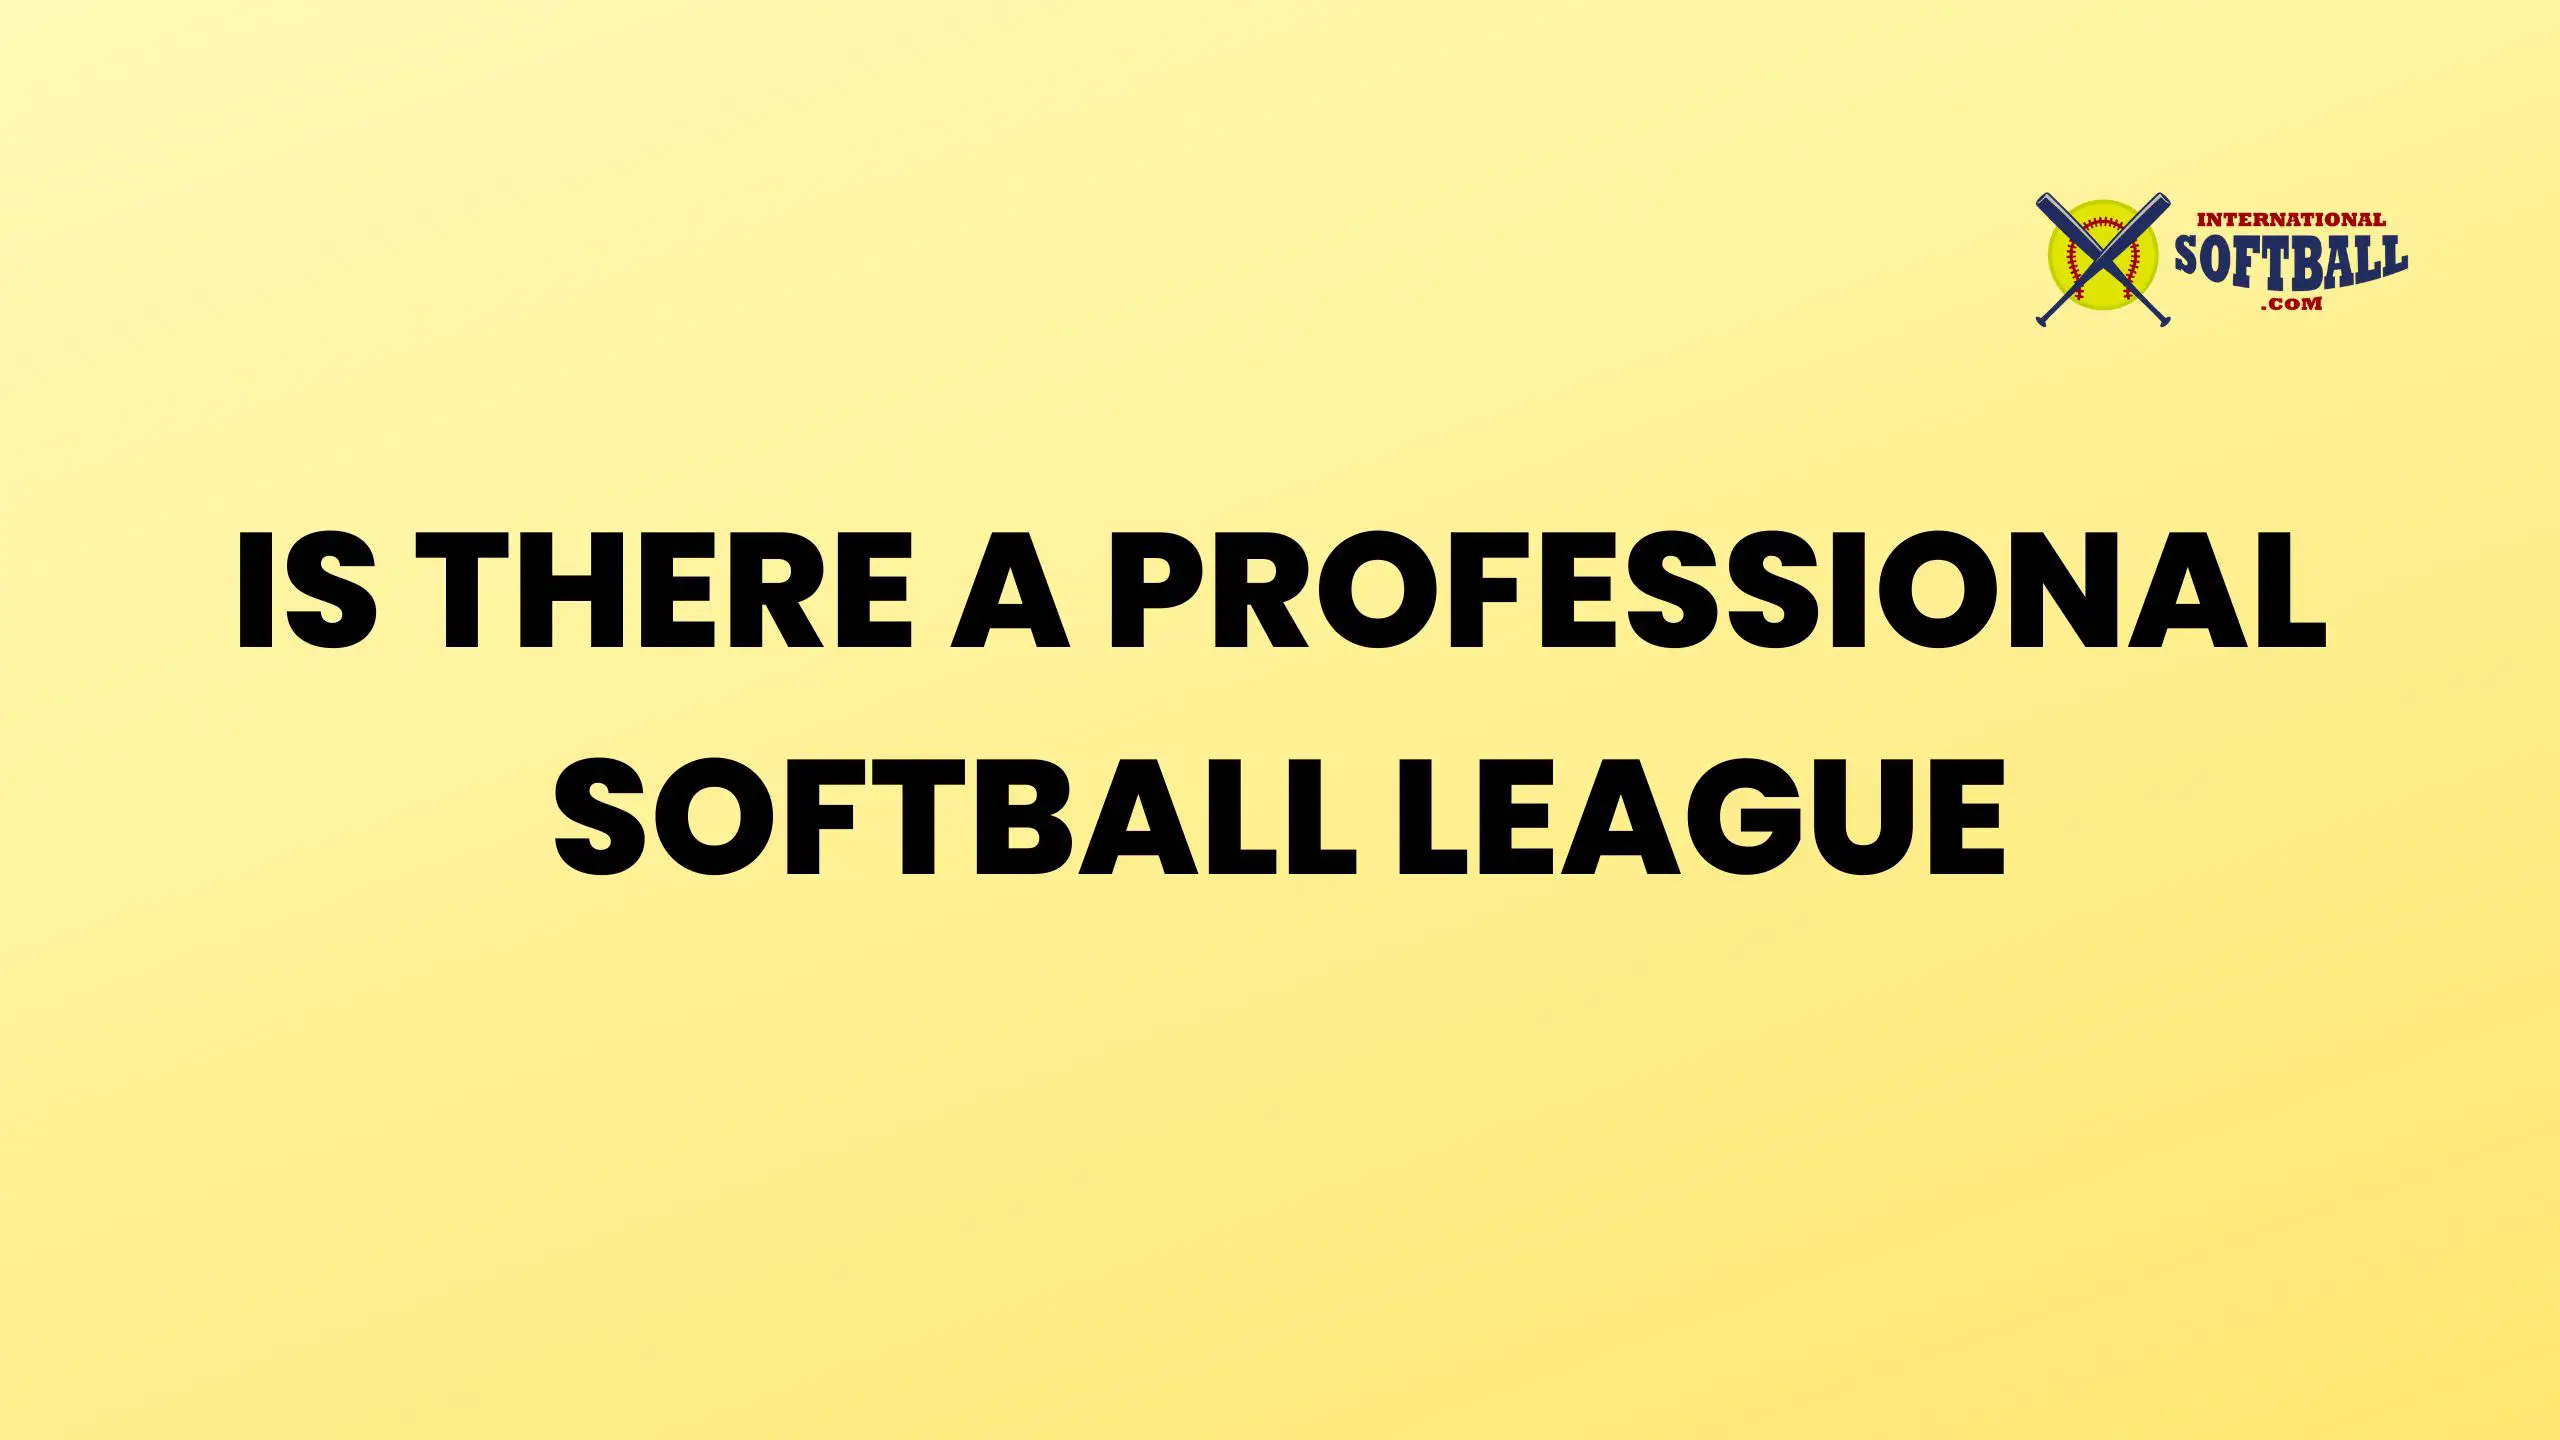 IS THERE A PROFESSIONAL SOFTBALL LEAGUE